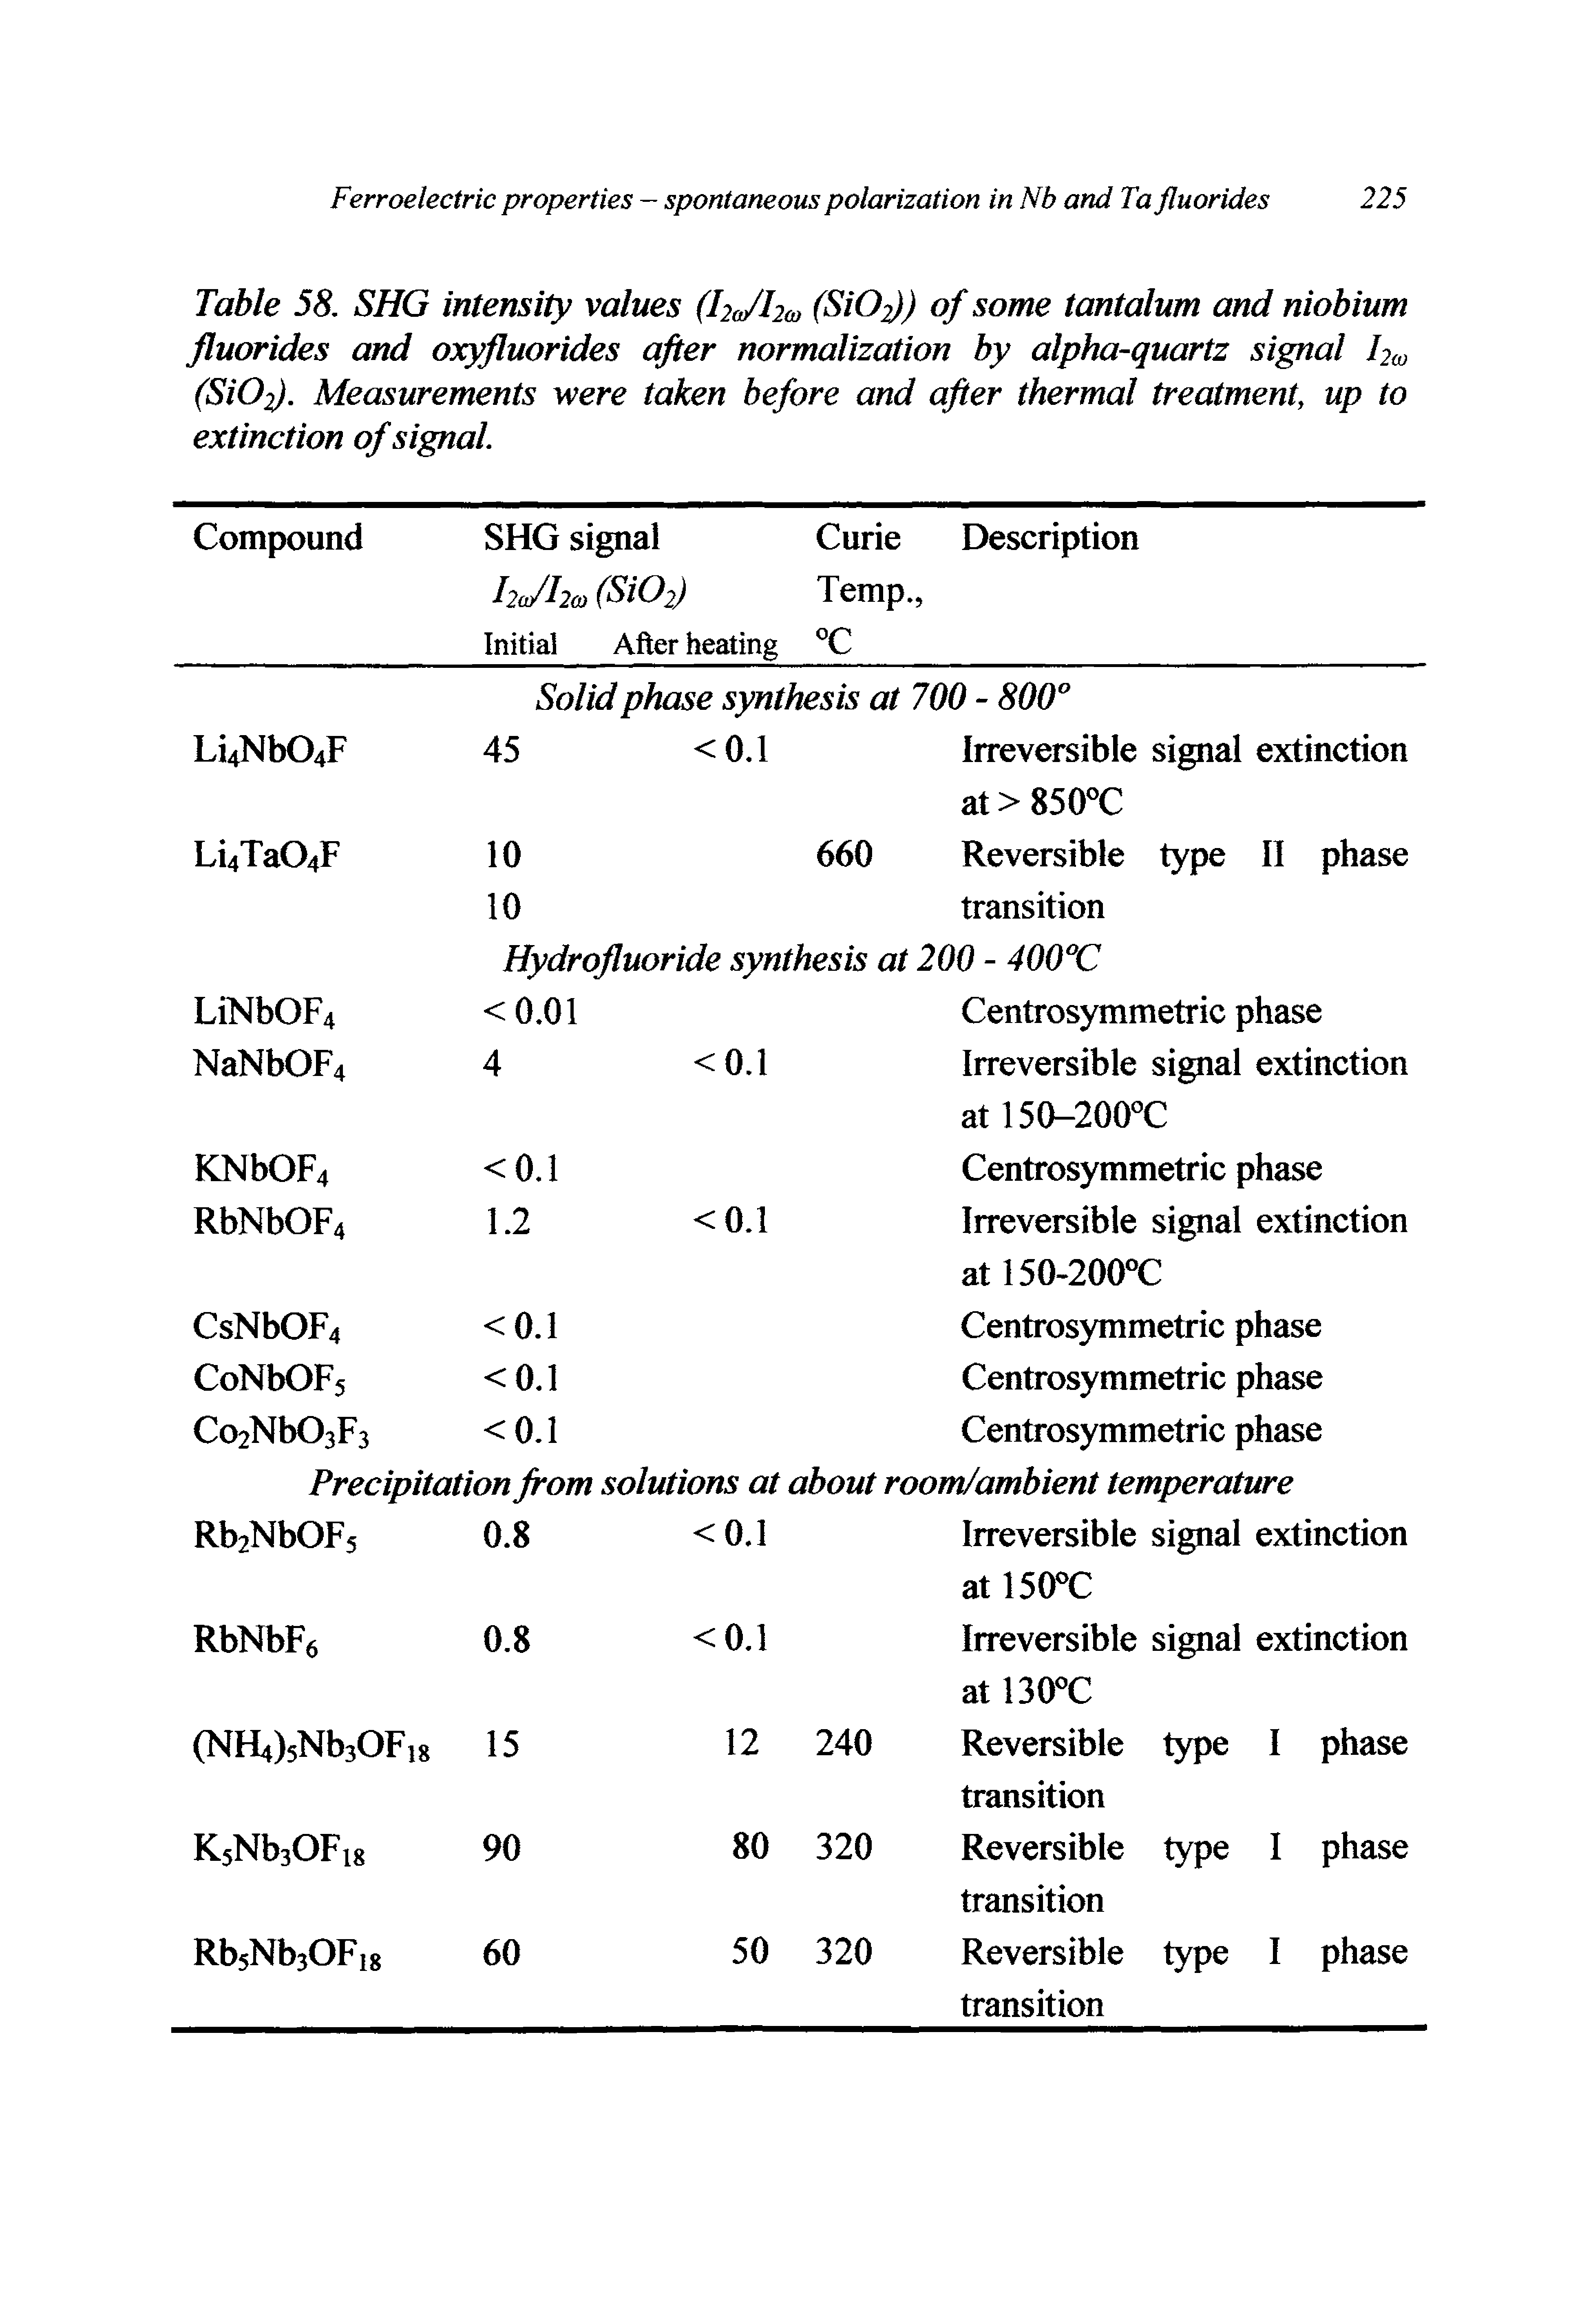 Table 58. SHG intensity values (hdho, (SiO2)) °f some tantalum and niobium fluorides and oxyfluorides after normalization by alpha-quartz signal fu (SiO]). Measurements were taken before and after thermal treatment, up to extinction of signal.